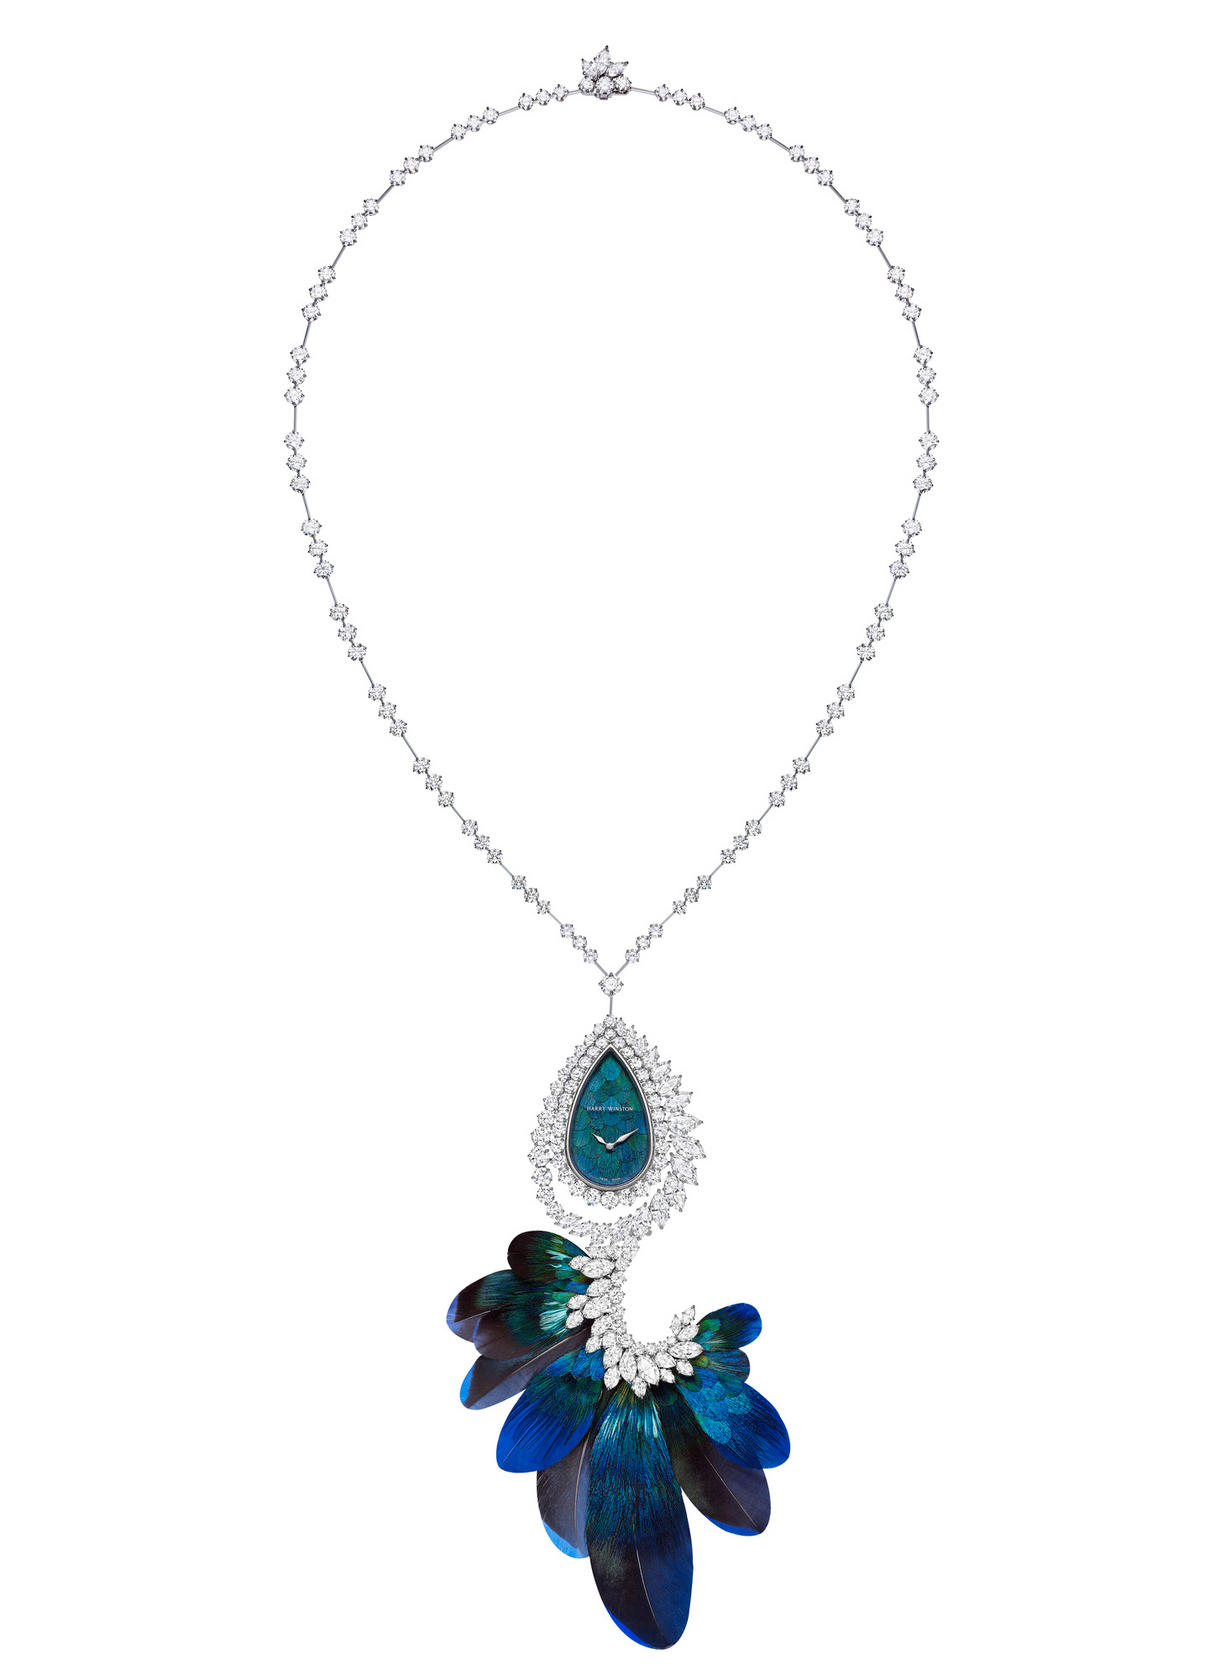 Ultimate Adornment Timepiece pendant with feathers (HK$10.78 million)